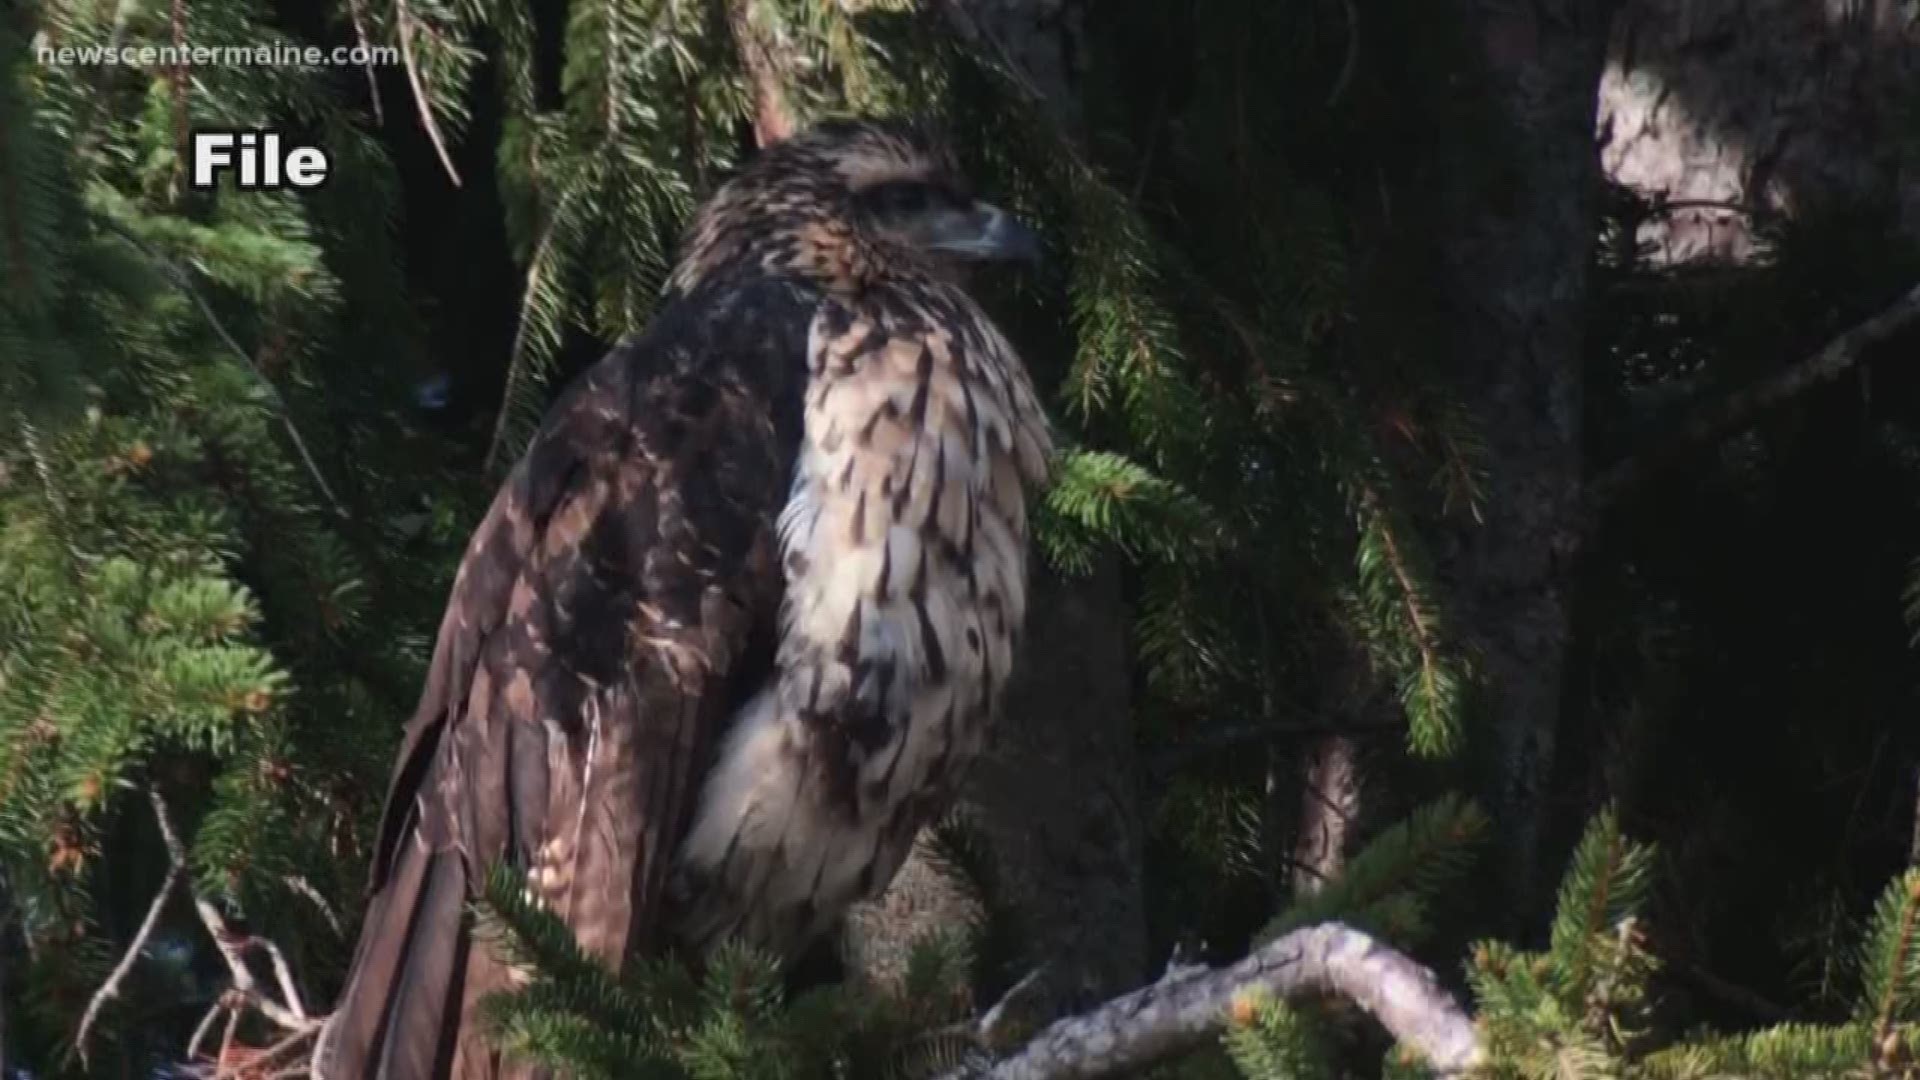 Cross-country skiers rescued a rare hawk from Peru during the snowstorm Sunday in Portland.